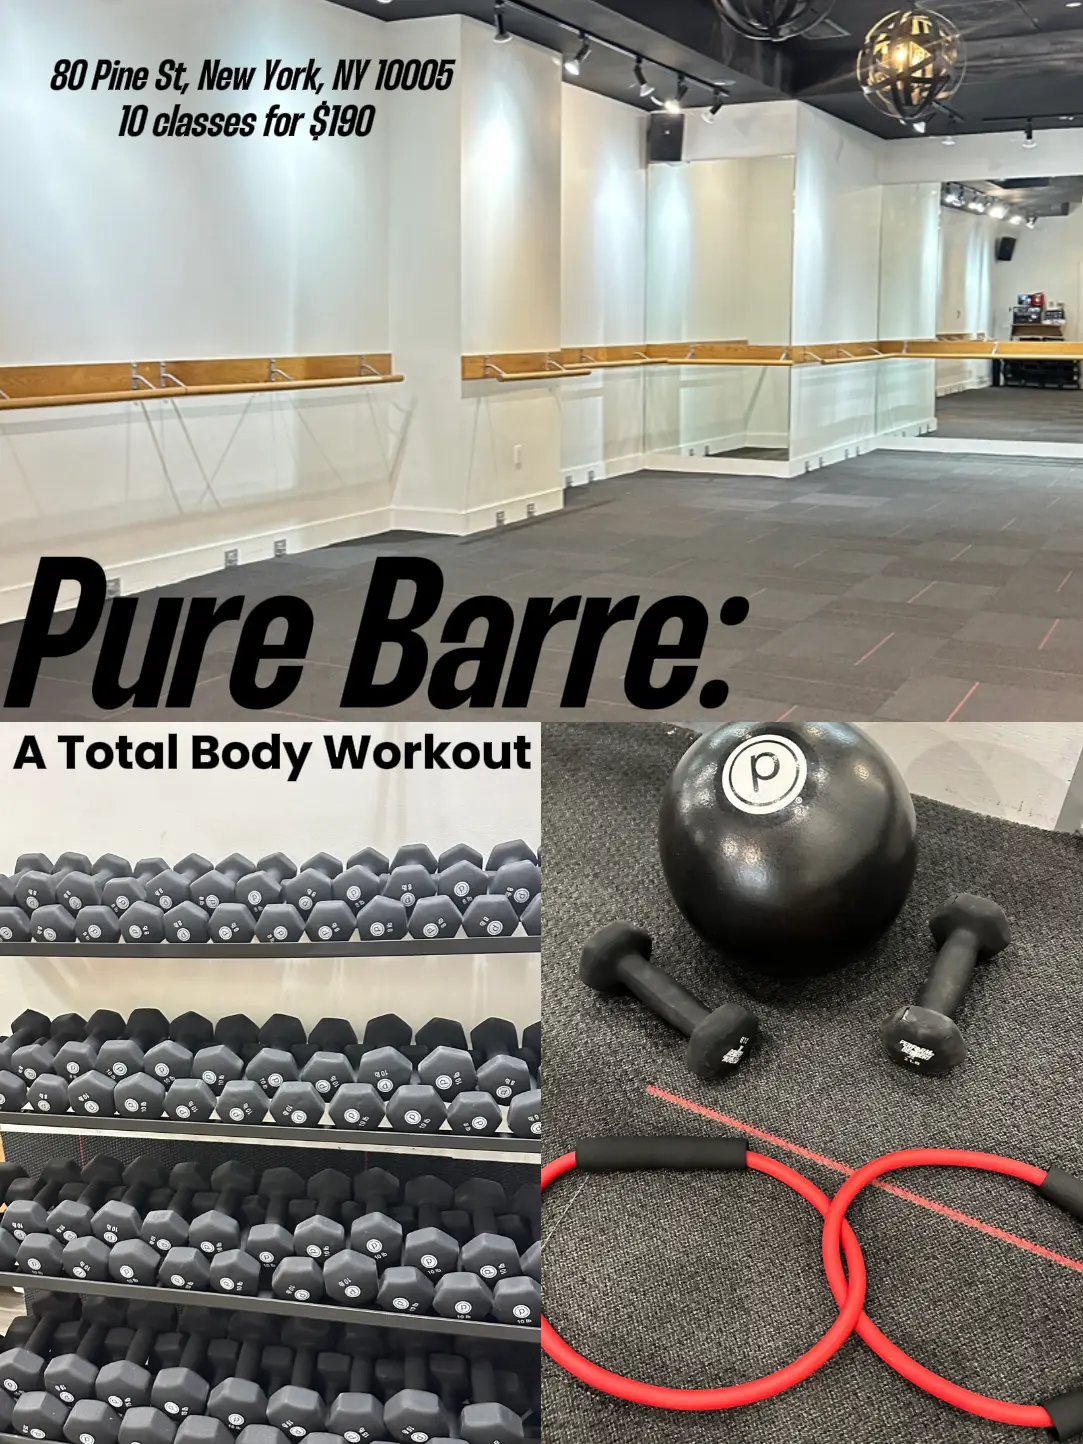 Up to 49% Off on Barre Class at Body Barre Fitness